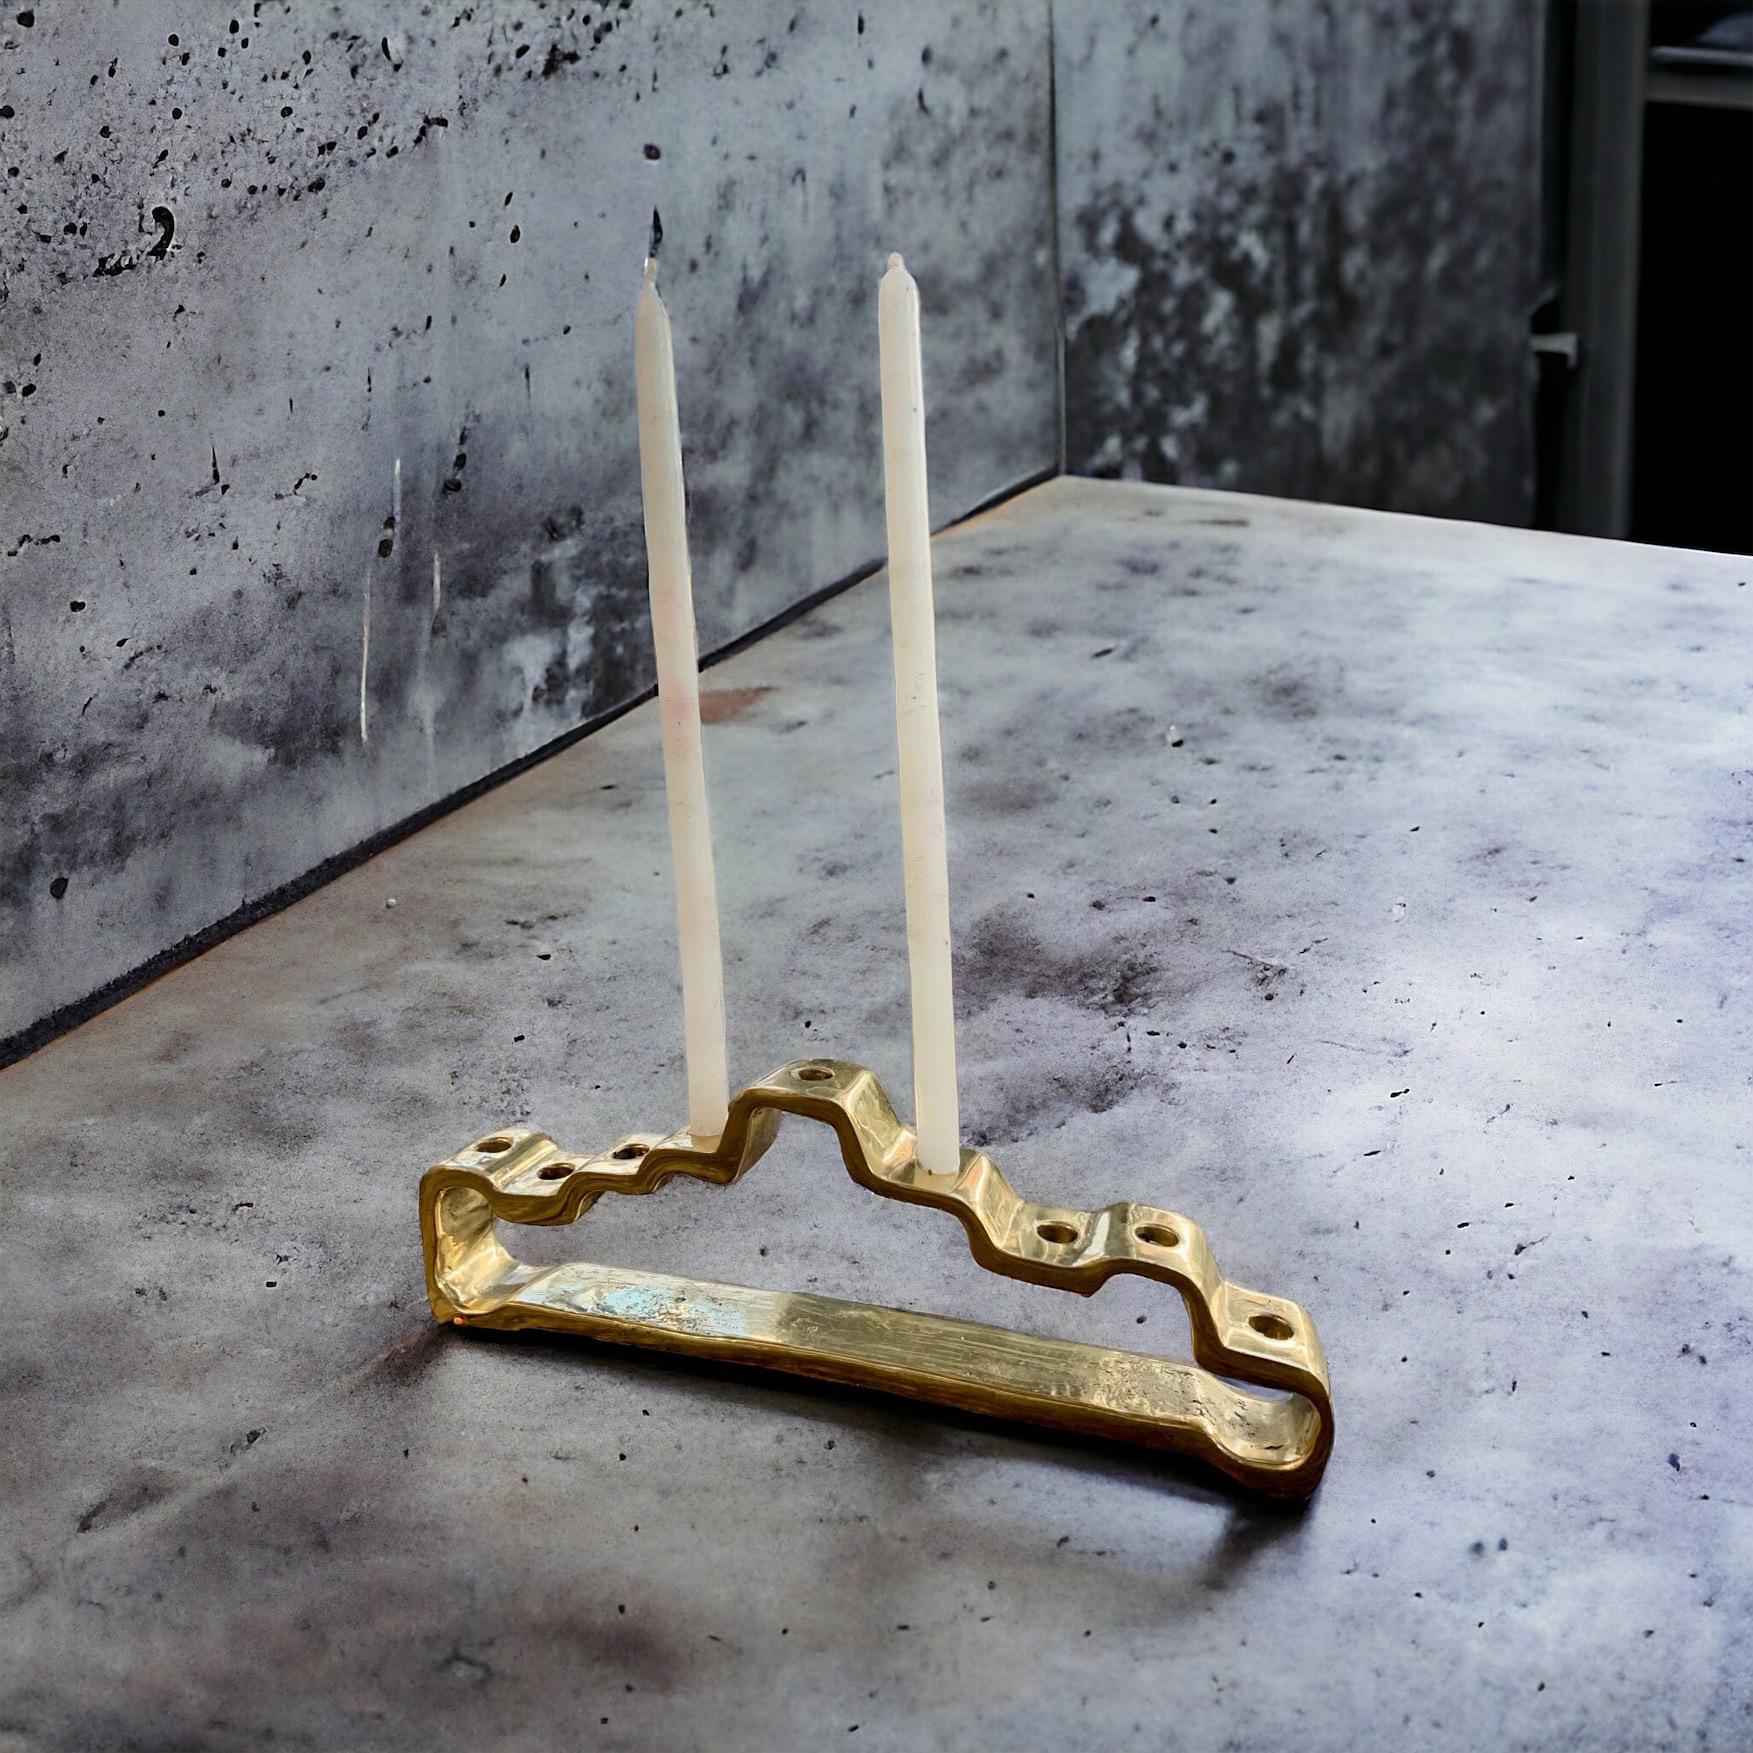 The decorative Menorah was created by David Marshall, it is made of  sand cast brass. 
Handmade, mounted and finished in our foundry and workshop in Spain from recycled materials.
Certified authentic by the Artist David Marshall with his